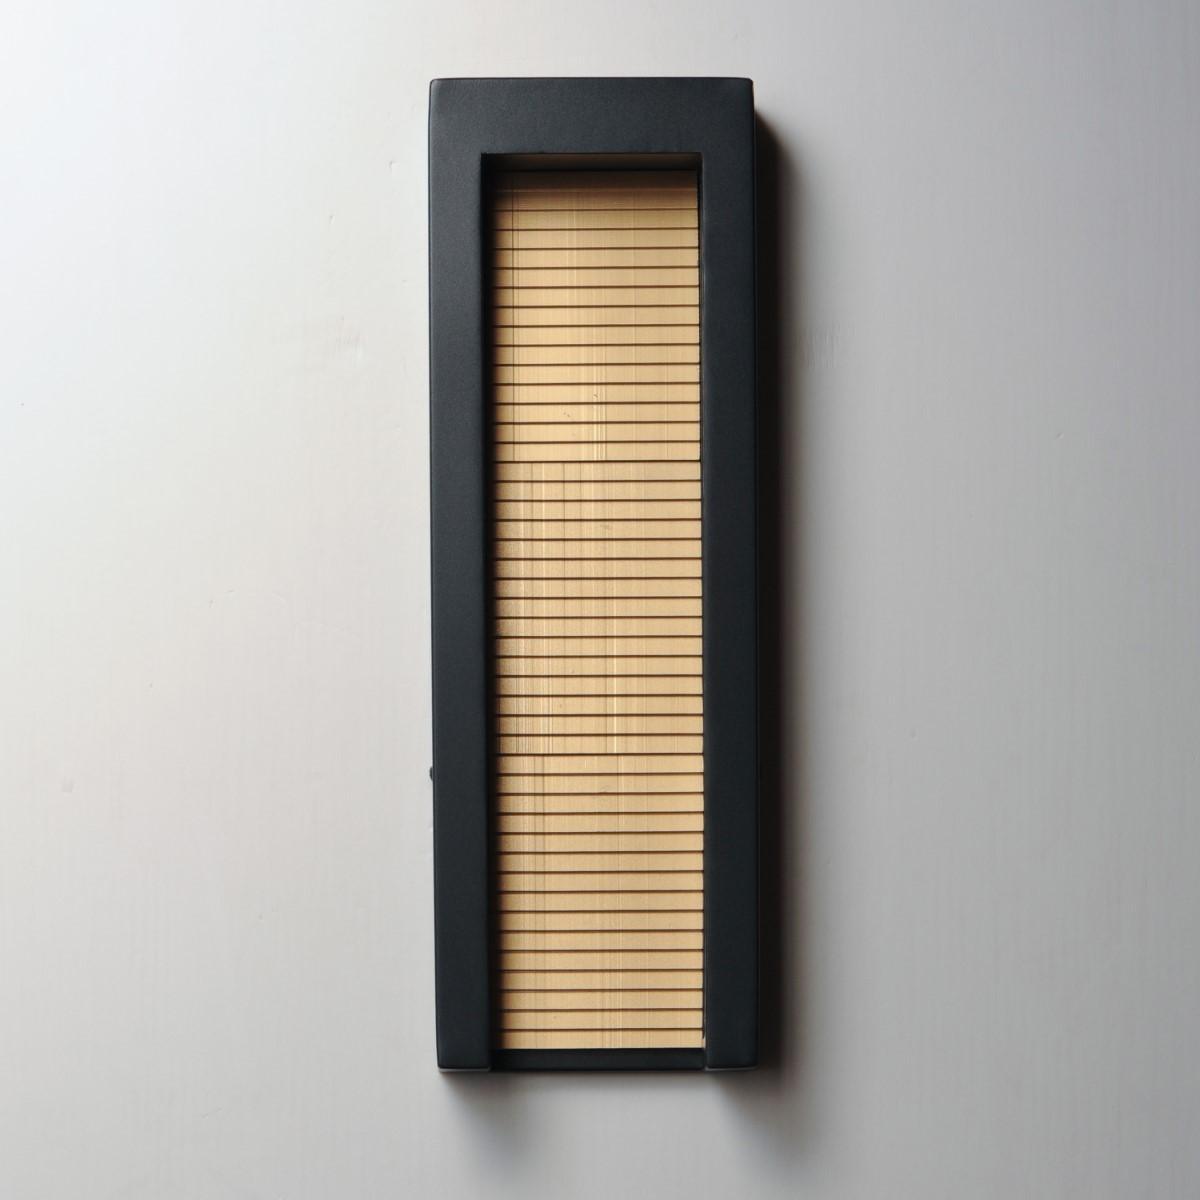 Alcove 20 in. LED Outdoor Wall Sconce 3000K Black & Gold Finish